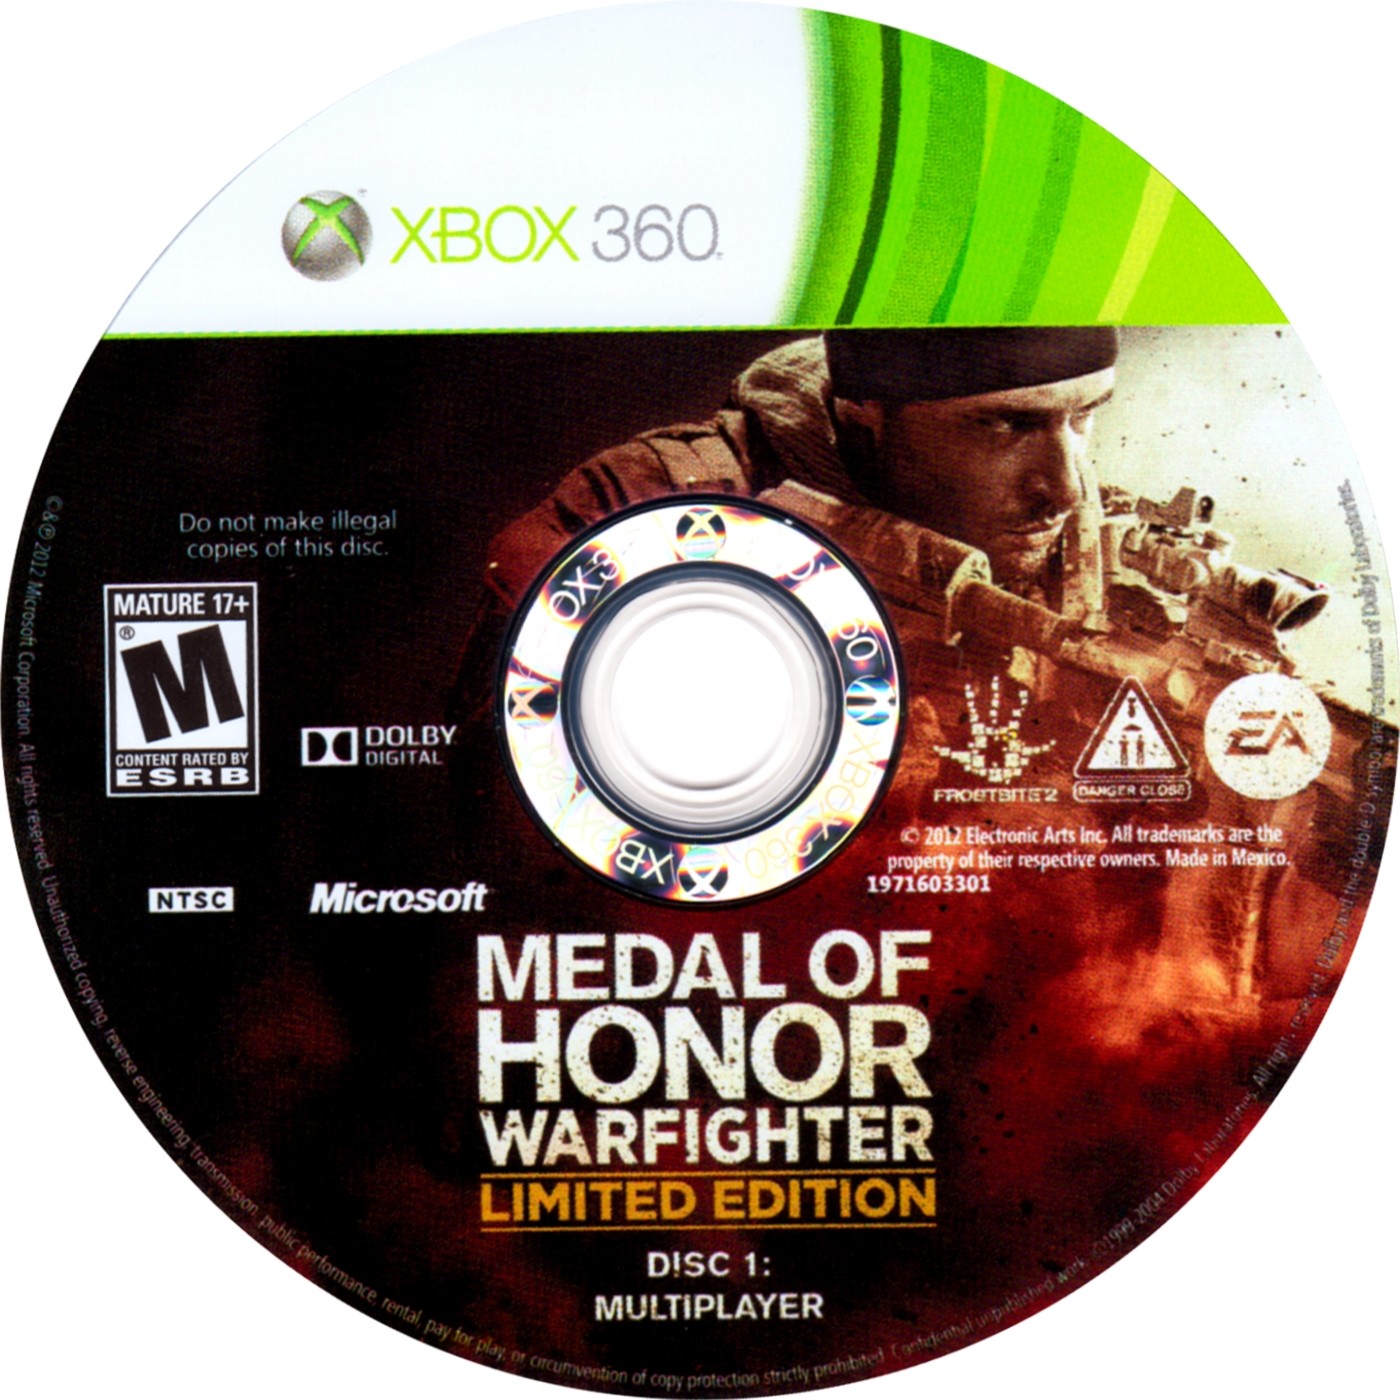 Medal of honor xbox 360. Medal of Honor Warfighter Xbox 360. Medal of Honor Limited Edition Xbox 360. Xbox 360 обложка диска Medal of Honor Warfighter. Диск Medal of Honor 2005.